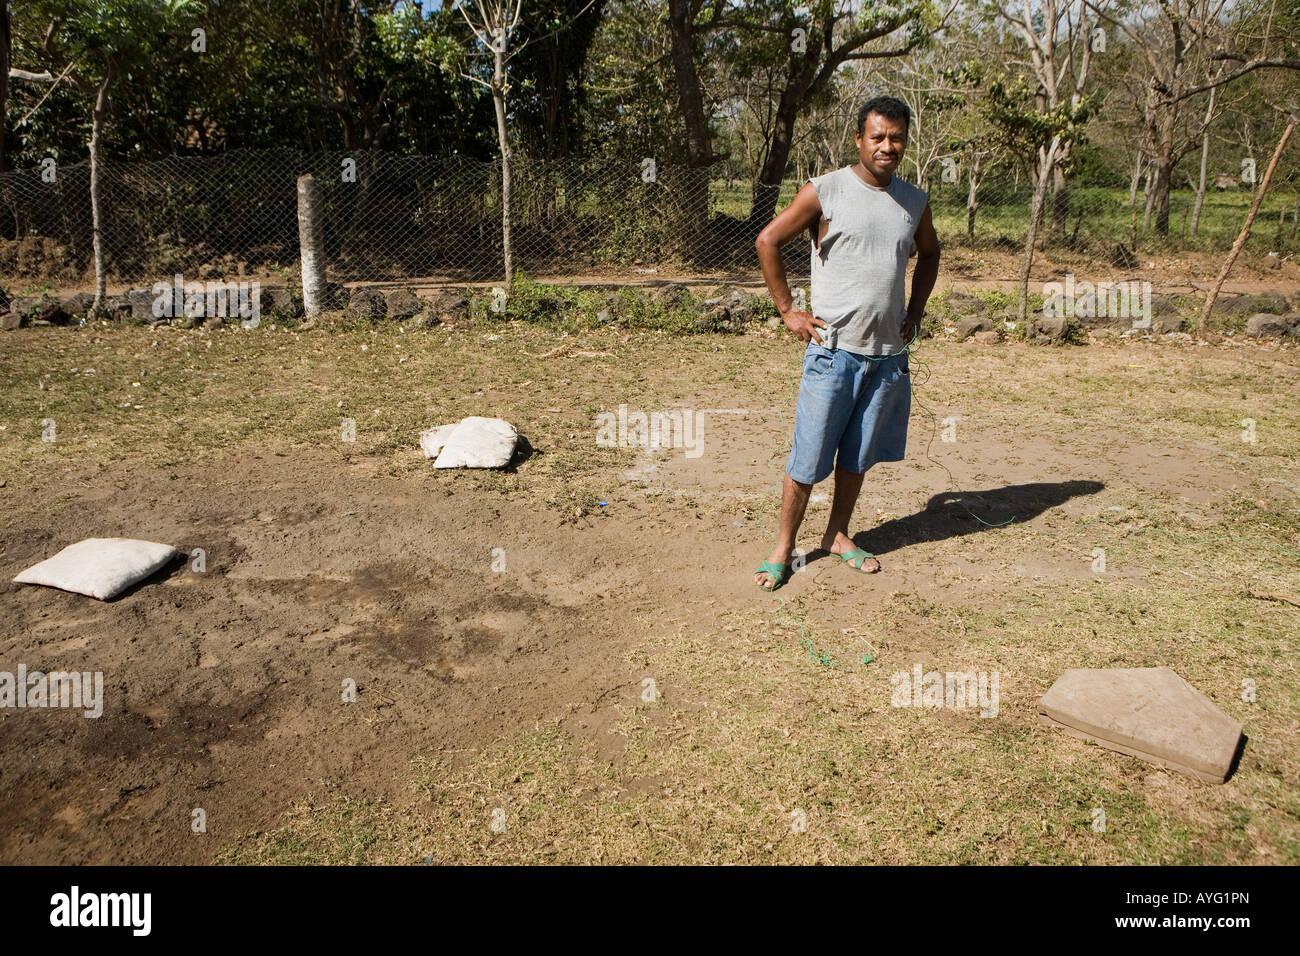 Man laying out field for Sunday baseball game Ometepe Island Nicaragua Stock Photo